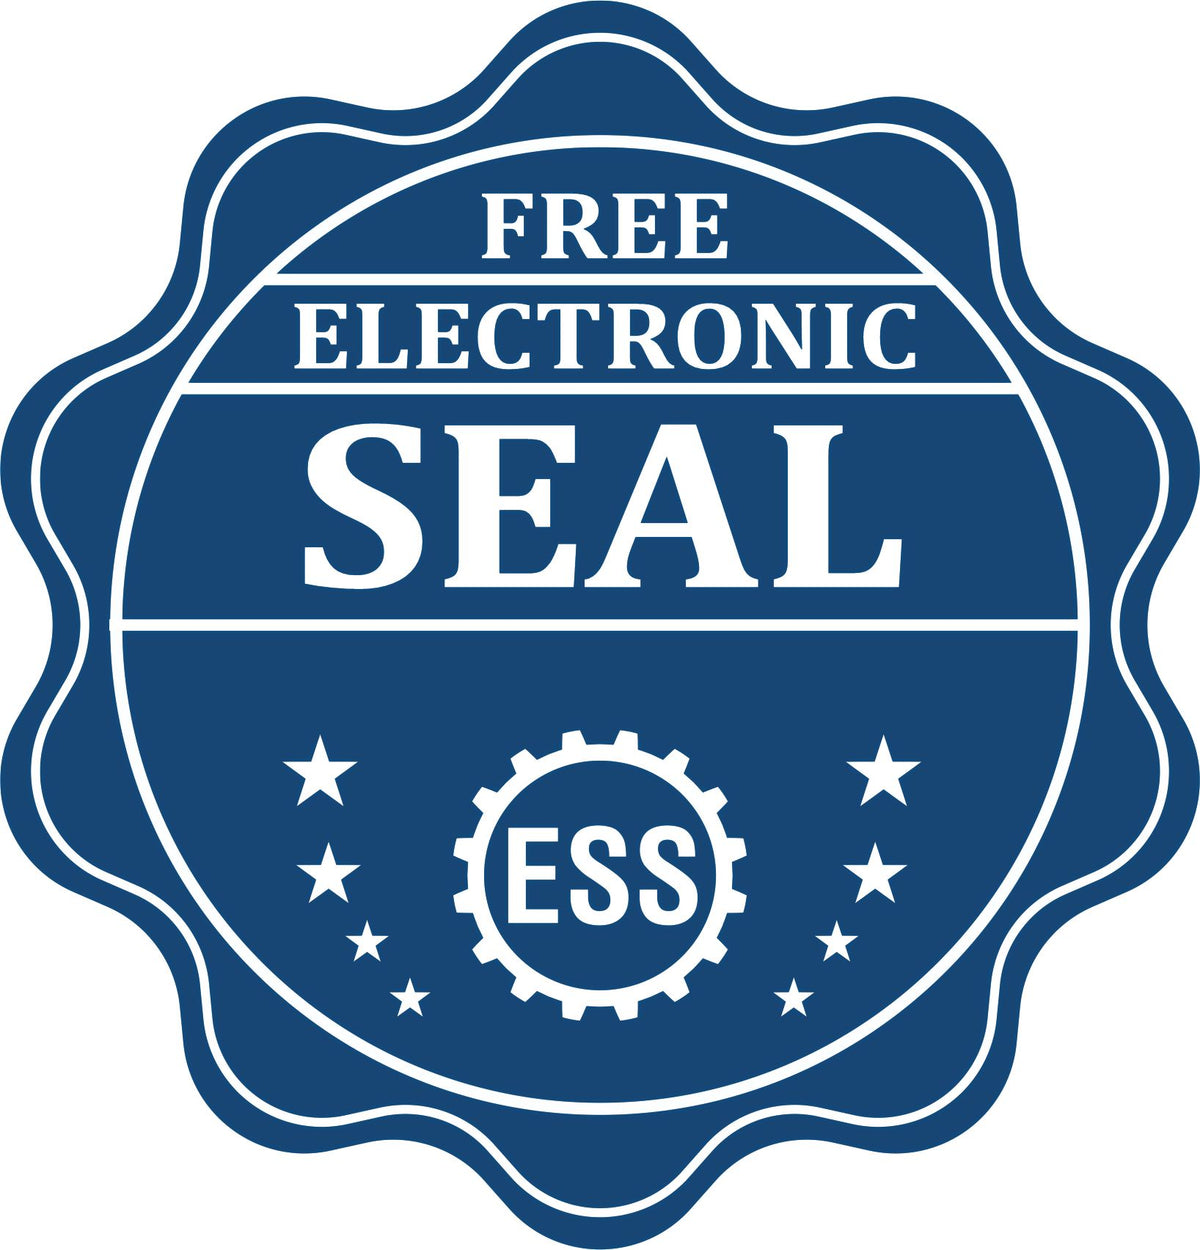 A badge showing a free electronic seal for the Slim Pre-Inked Wyoming Land Surveyor Seal Stamp with stars and the ESS gear on the emblem.